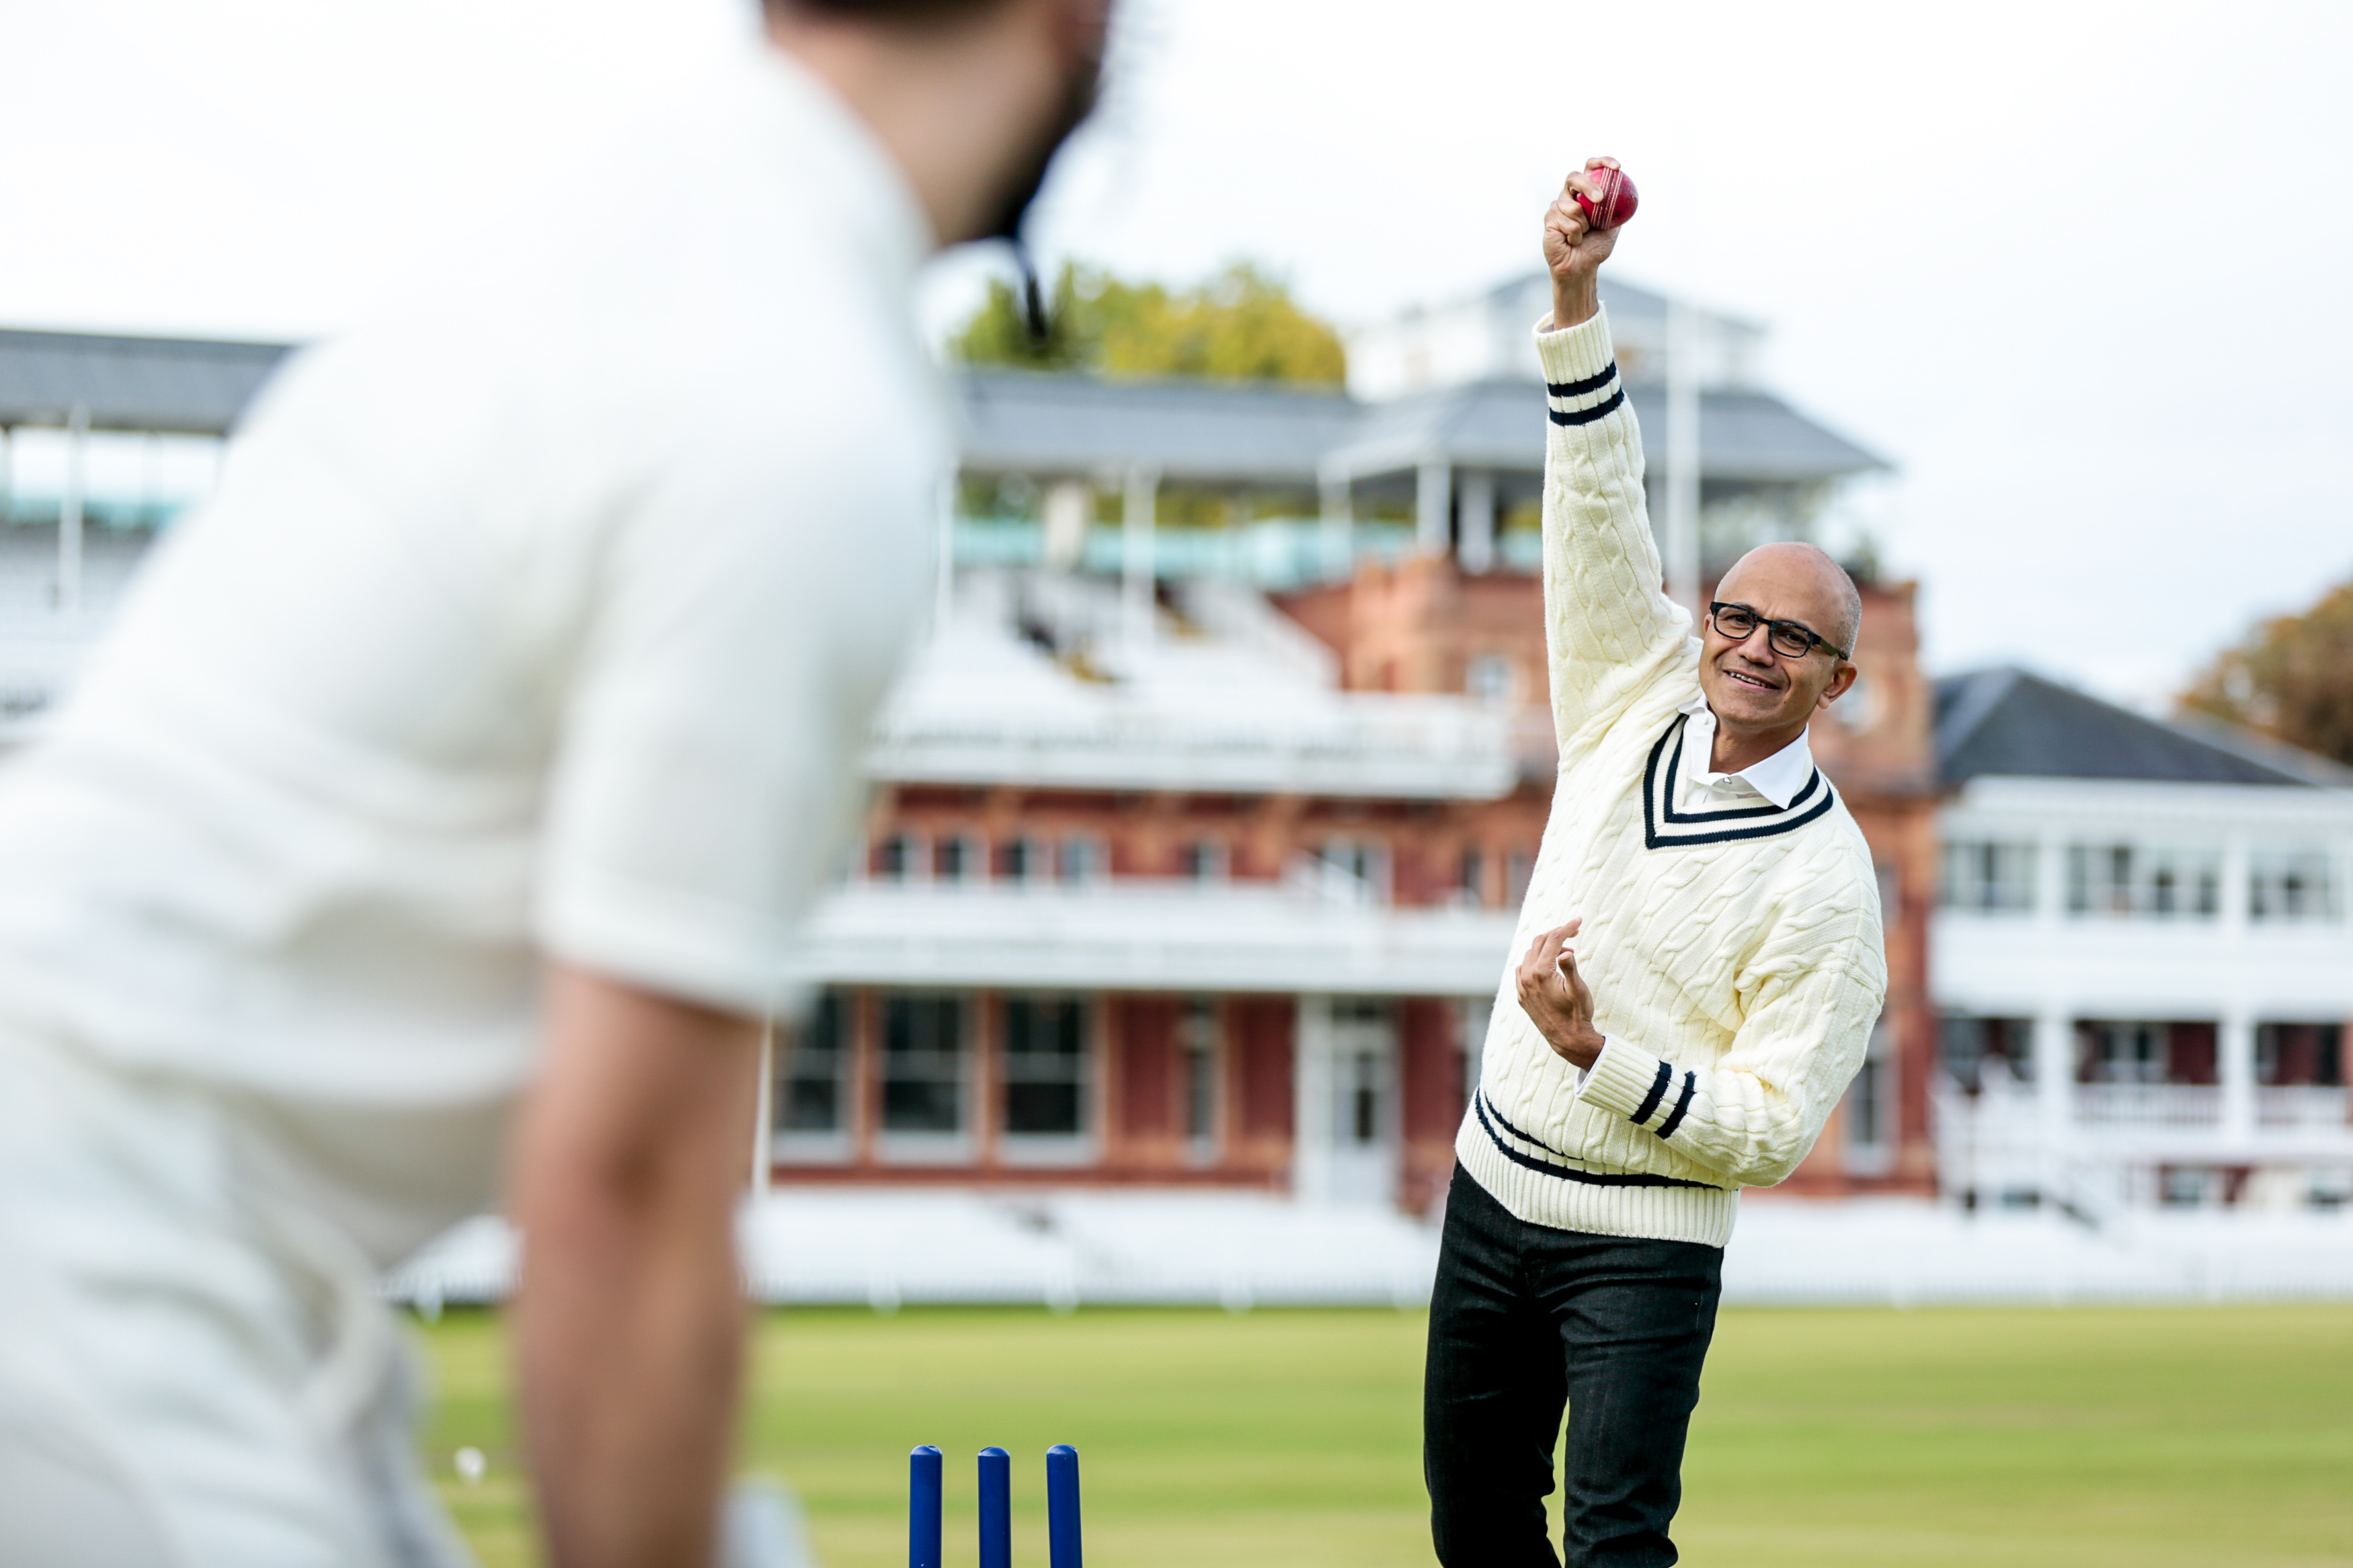 Microsoft CEO Satya Nadella bowls at Lord's, as he reflects on the impact of cricket in “Hit Refresh”